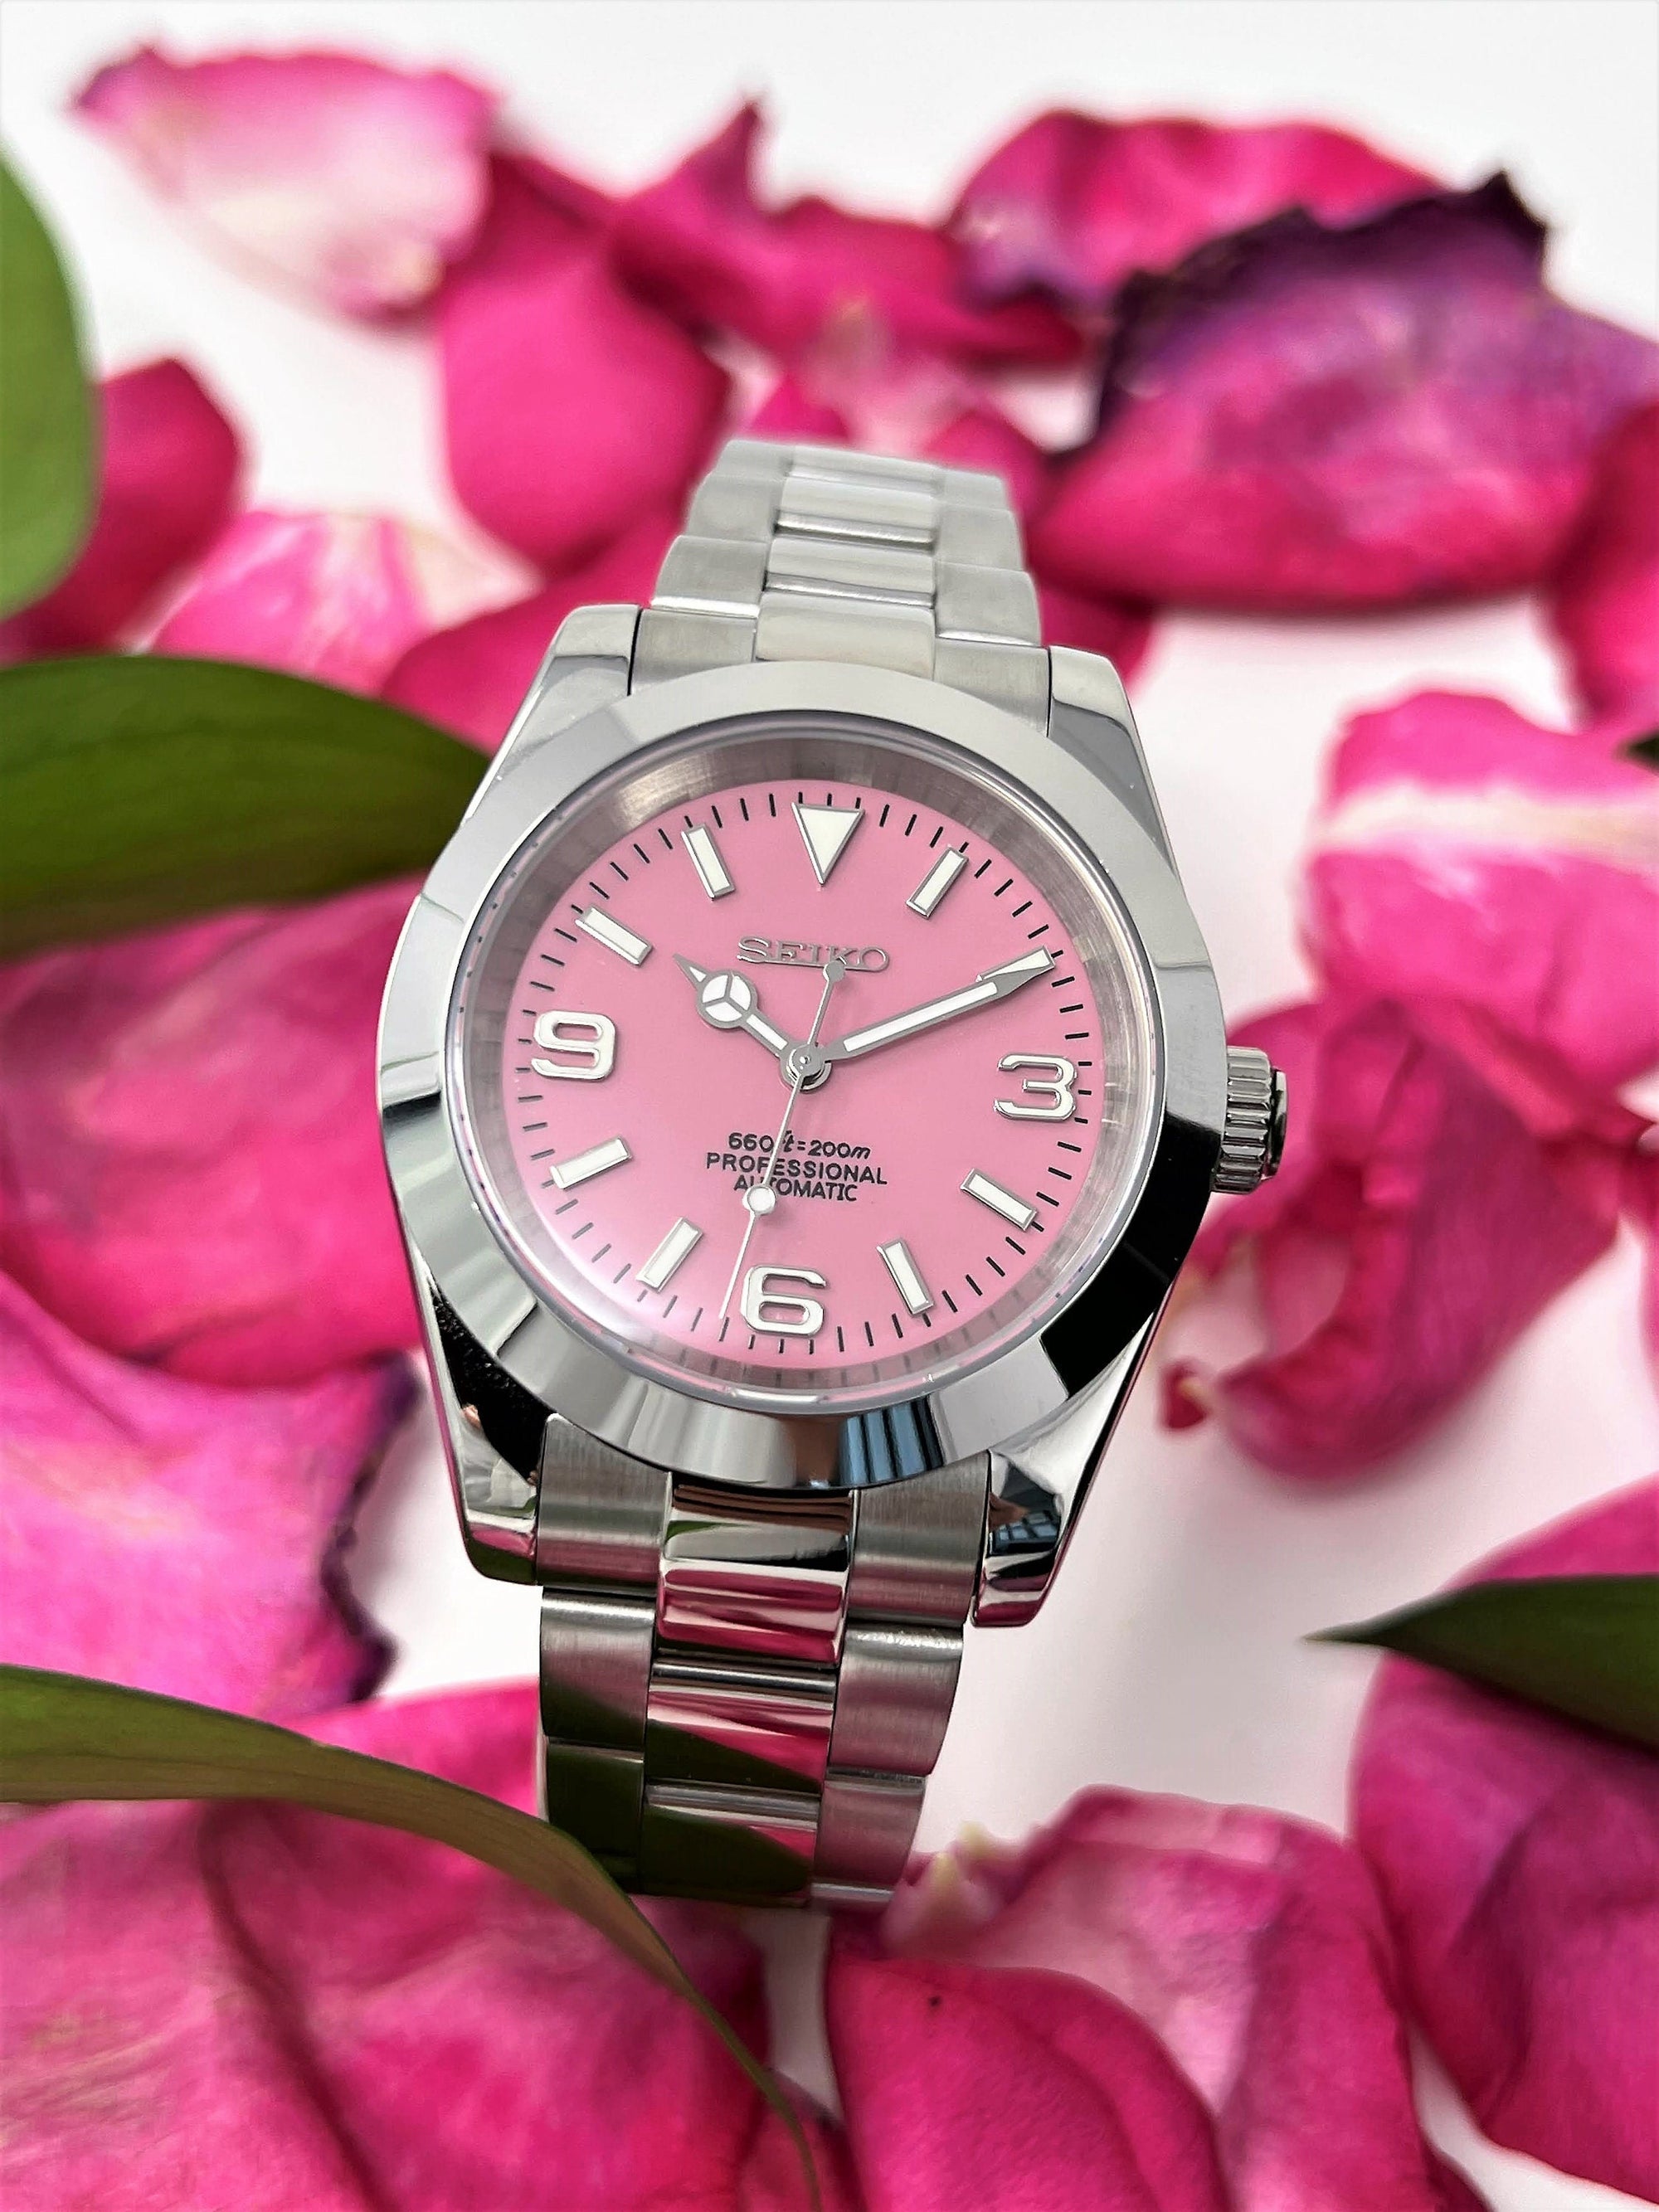 Seiko Rose Explorer - 36mm | 39mm | Pink Dial Stainless Steel | Oyster | Custom Build | Watch Mod | Seiko Mod | Explorer | Perpetual | Time